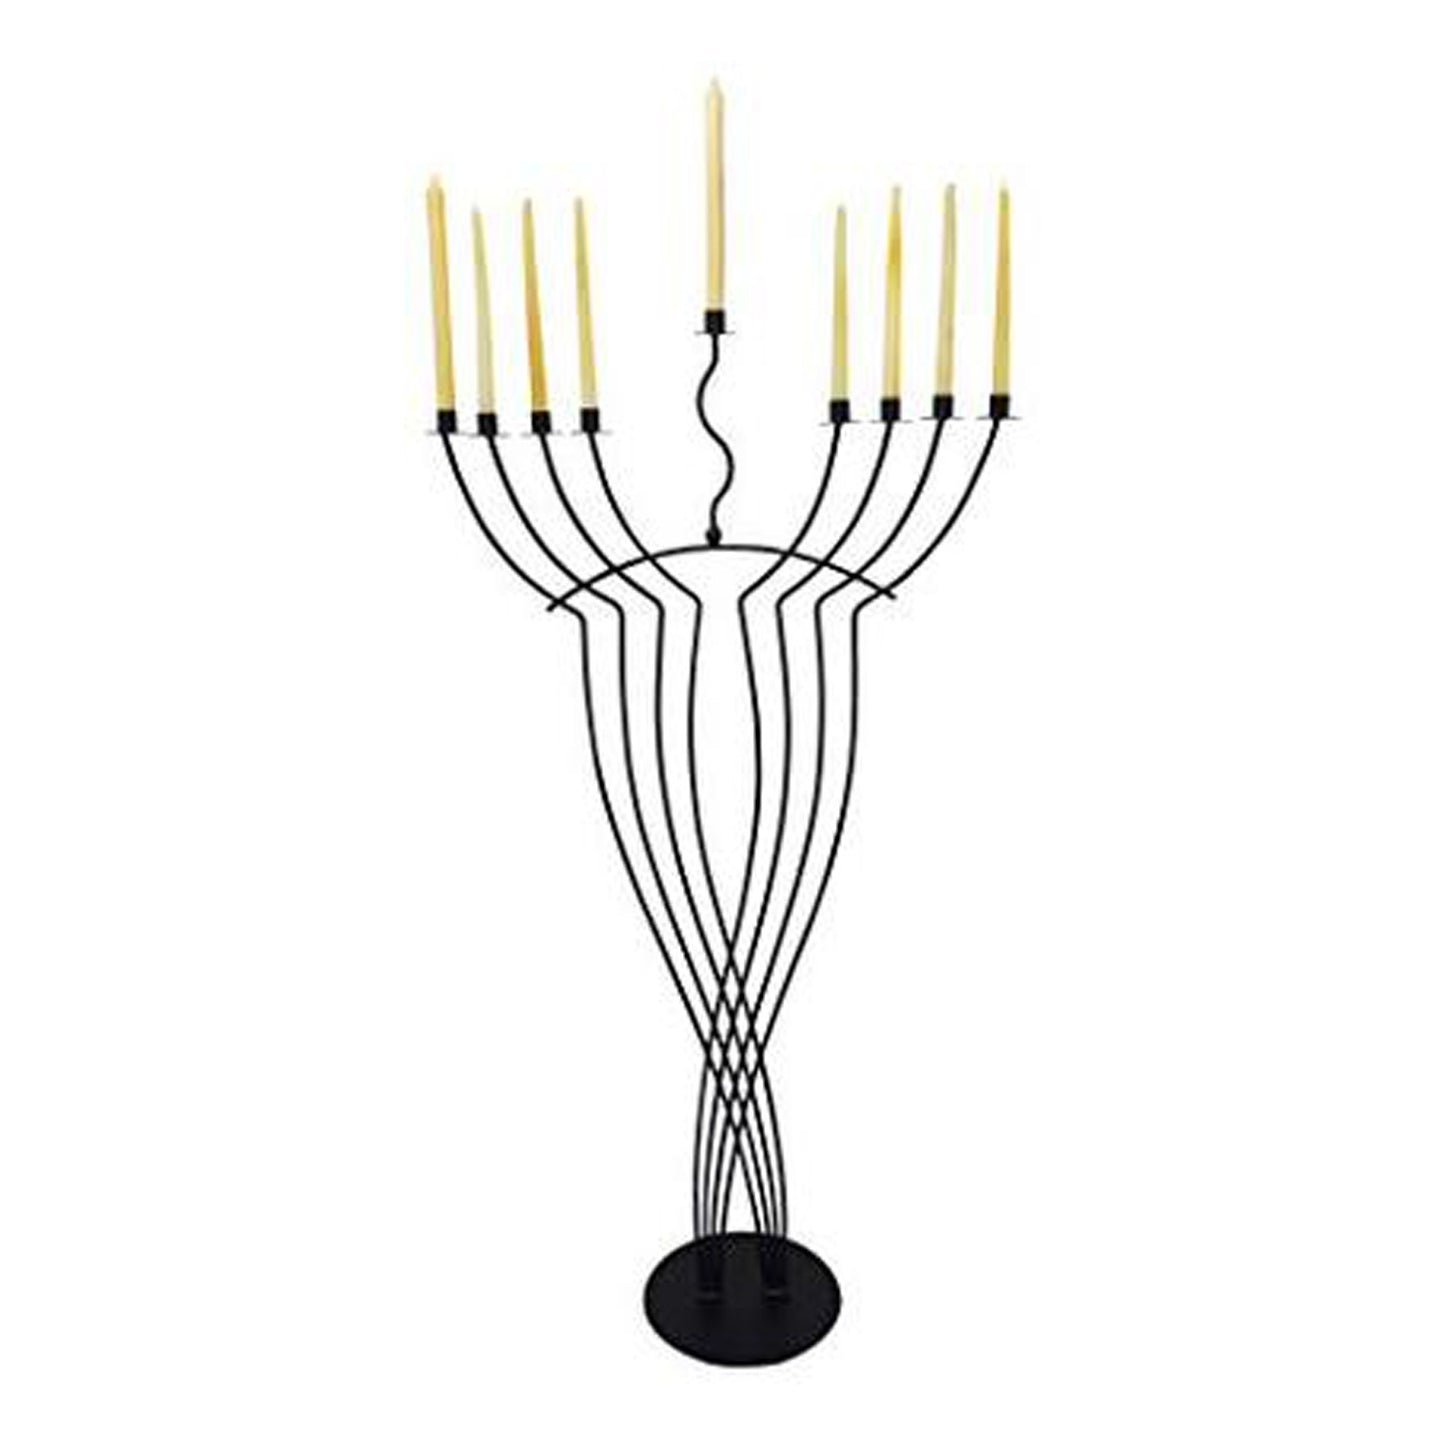 GiftBay 16006 Giant Tall Menorah 9-Branch Iron Metal, Black Powder Coated 47.5"H, Perfect for Synagouge Special Events